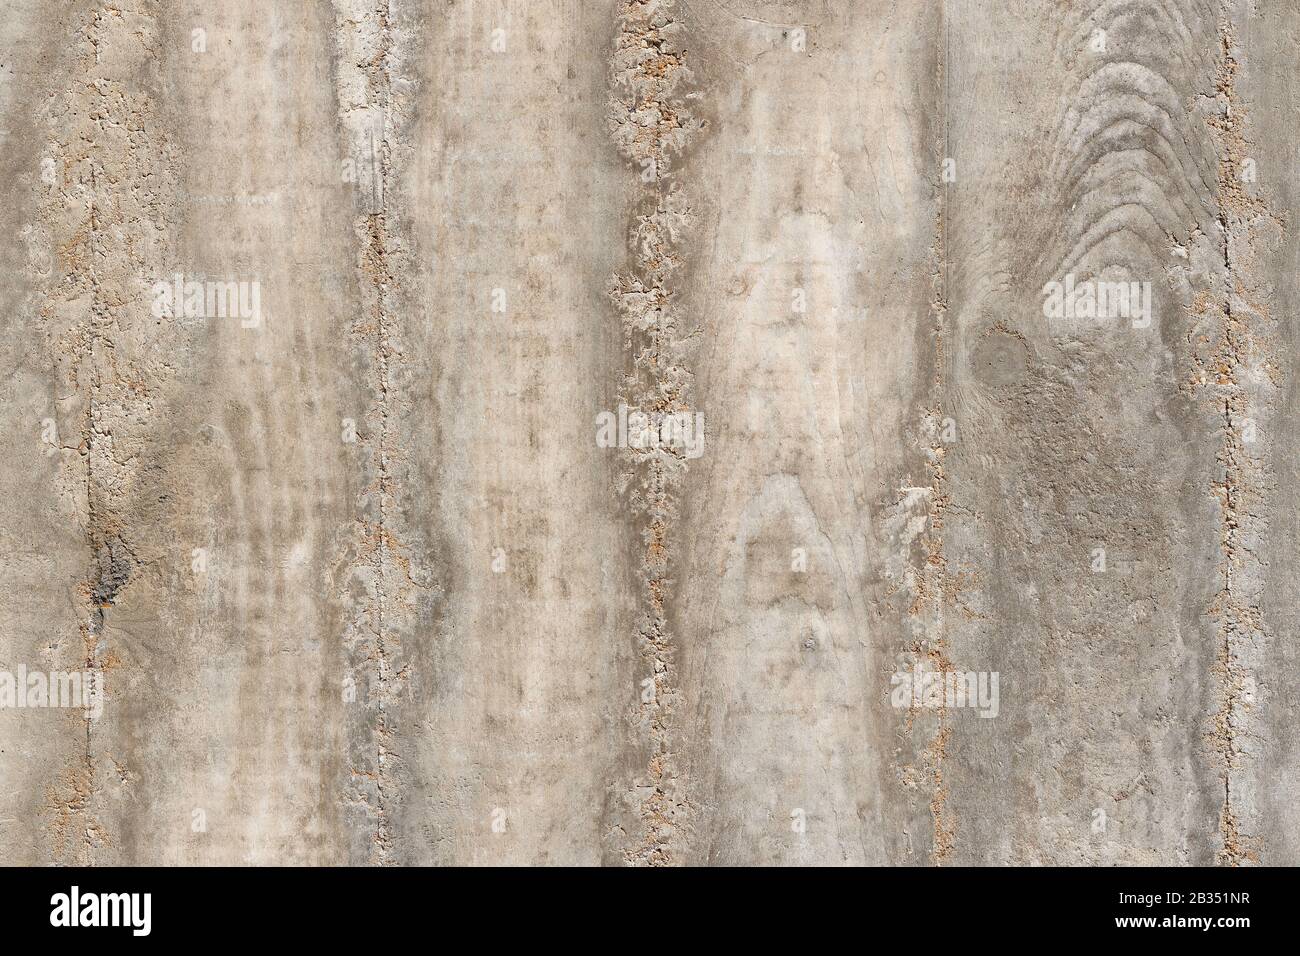 Concrete  Background Texture - grey-brown: background detailed texture of a rough grey-brown concrete wall, showing imprints of  wood lining's wooden Stock Photo